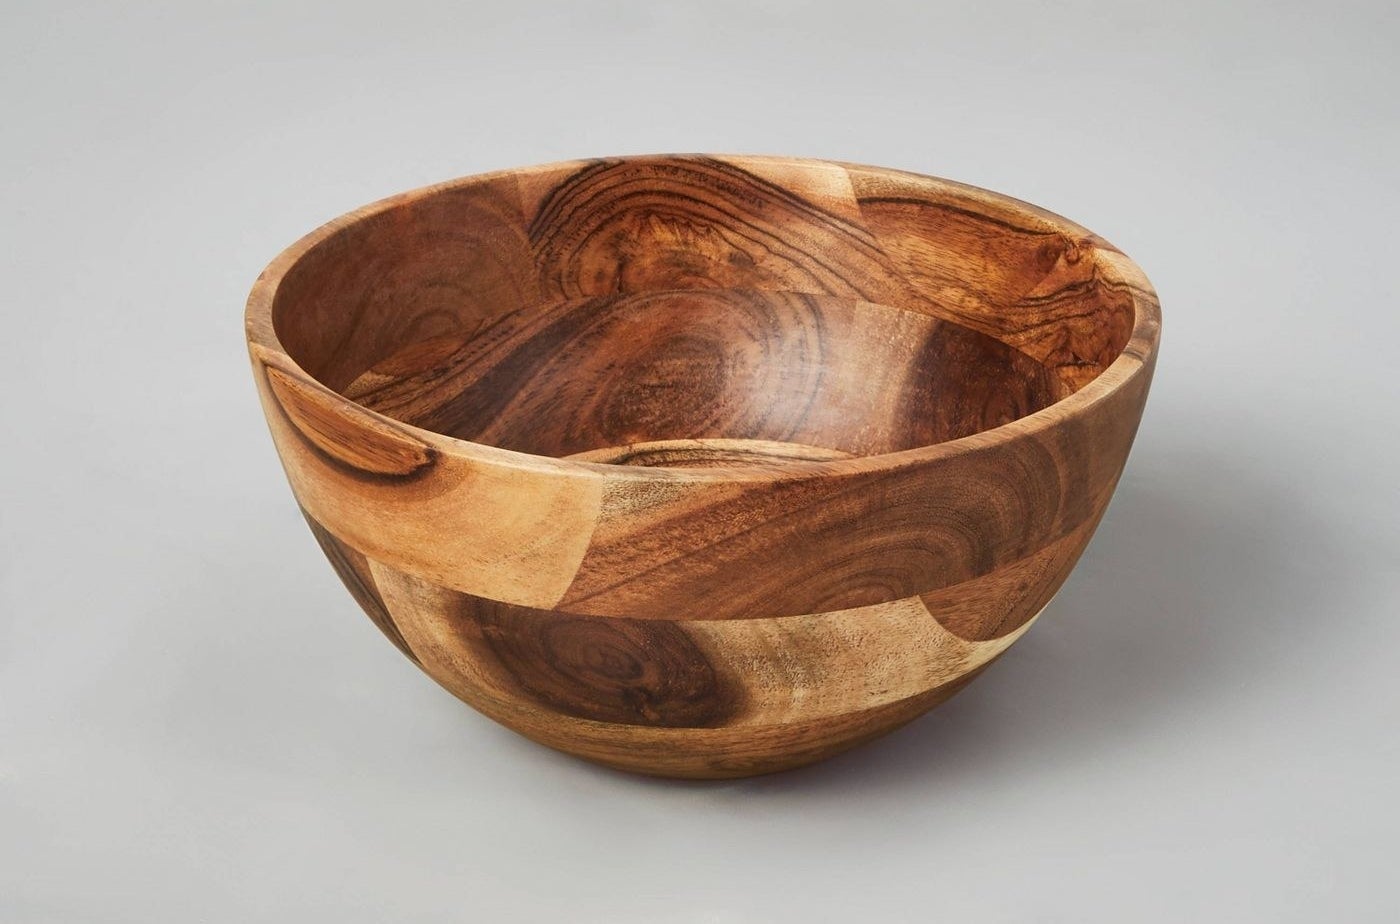 the wooden bowl